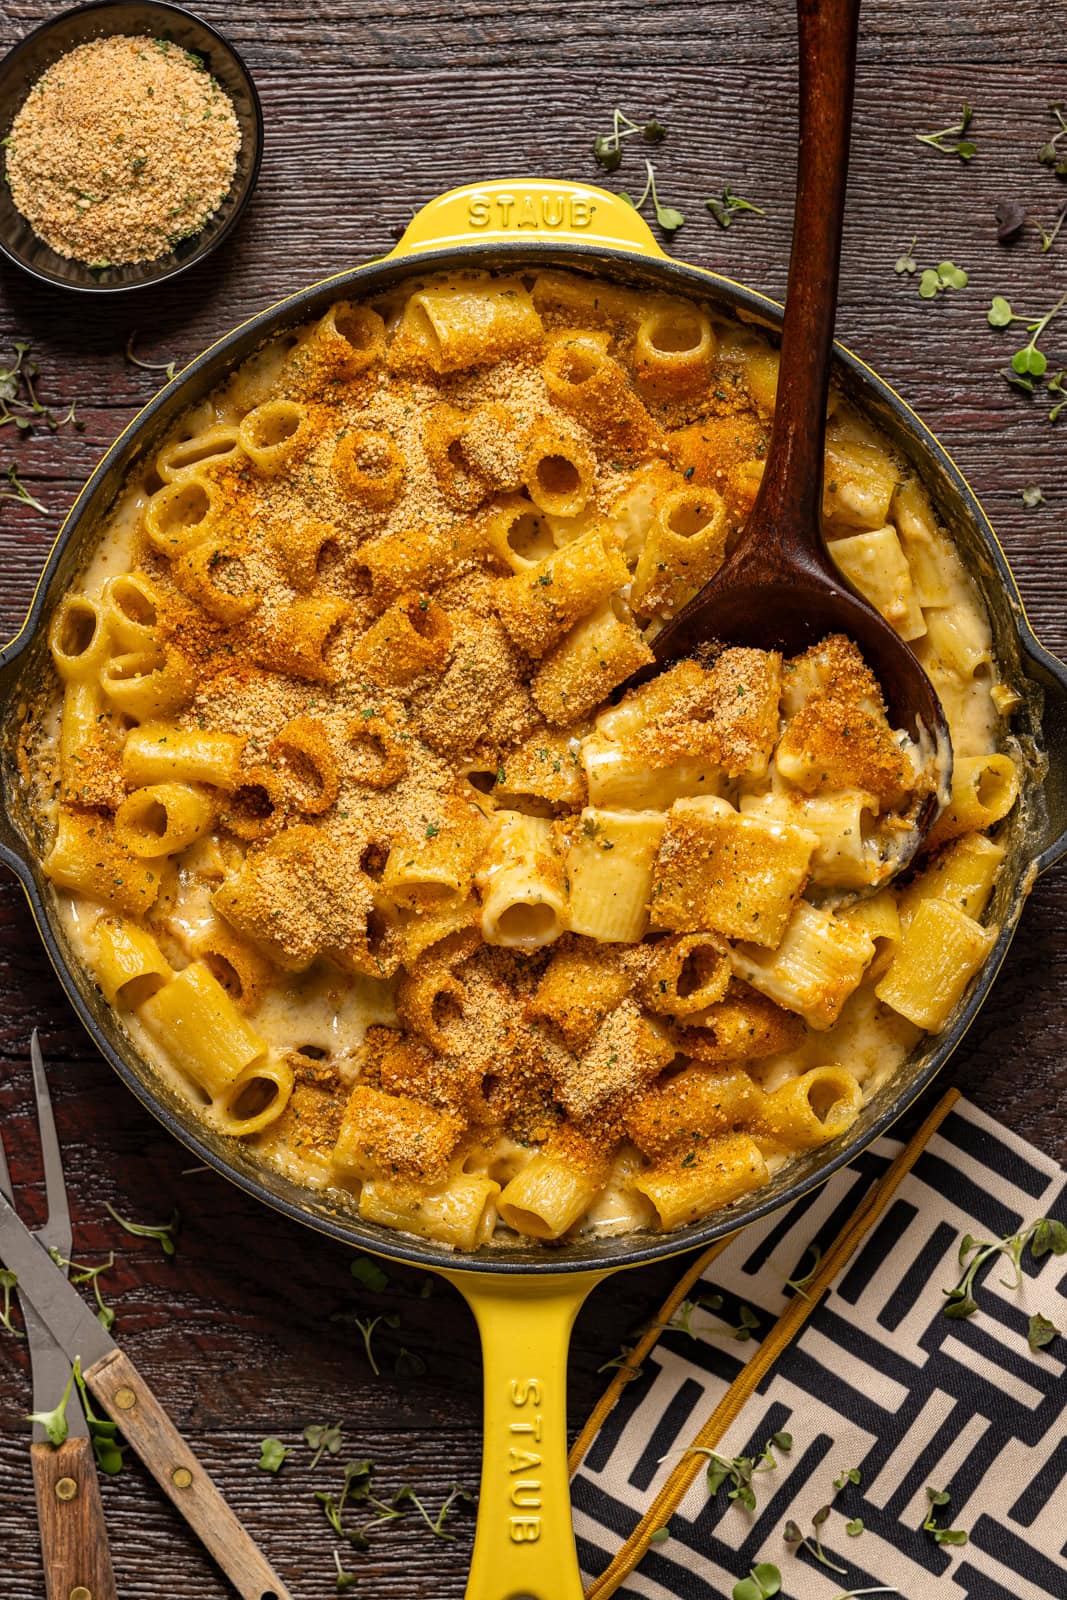 Baked mac and cheese in a yellow skillet with a wooden spoon and forks.